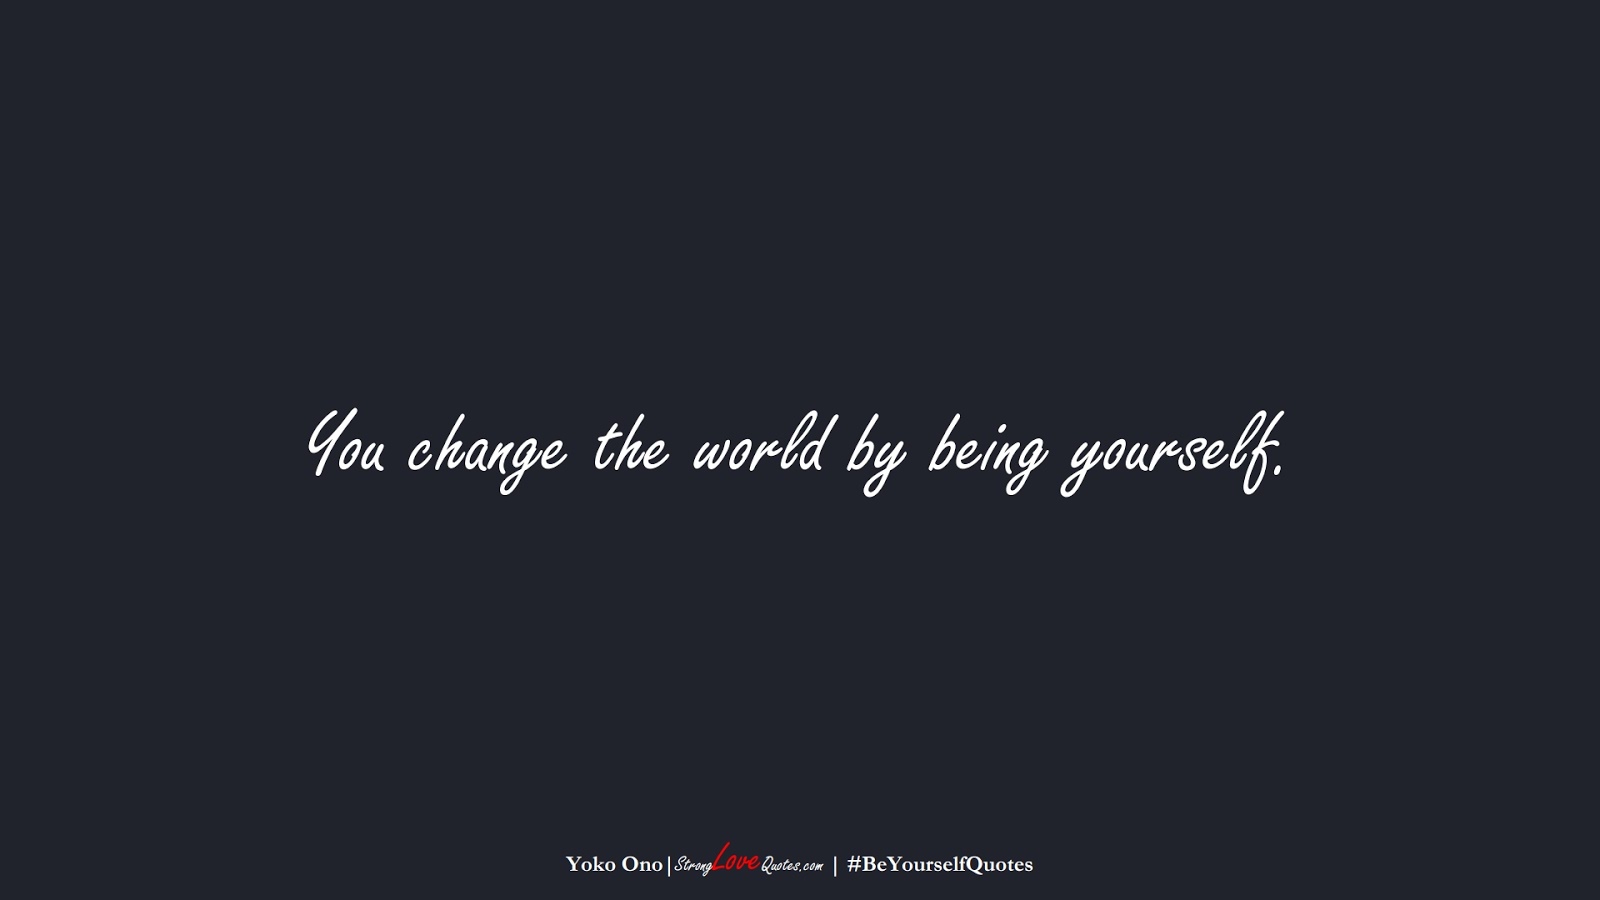 You change the world by being yourself. (Yoko Ono);  #BeYourselfQuotes